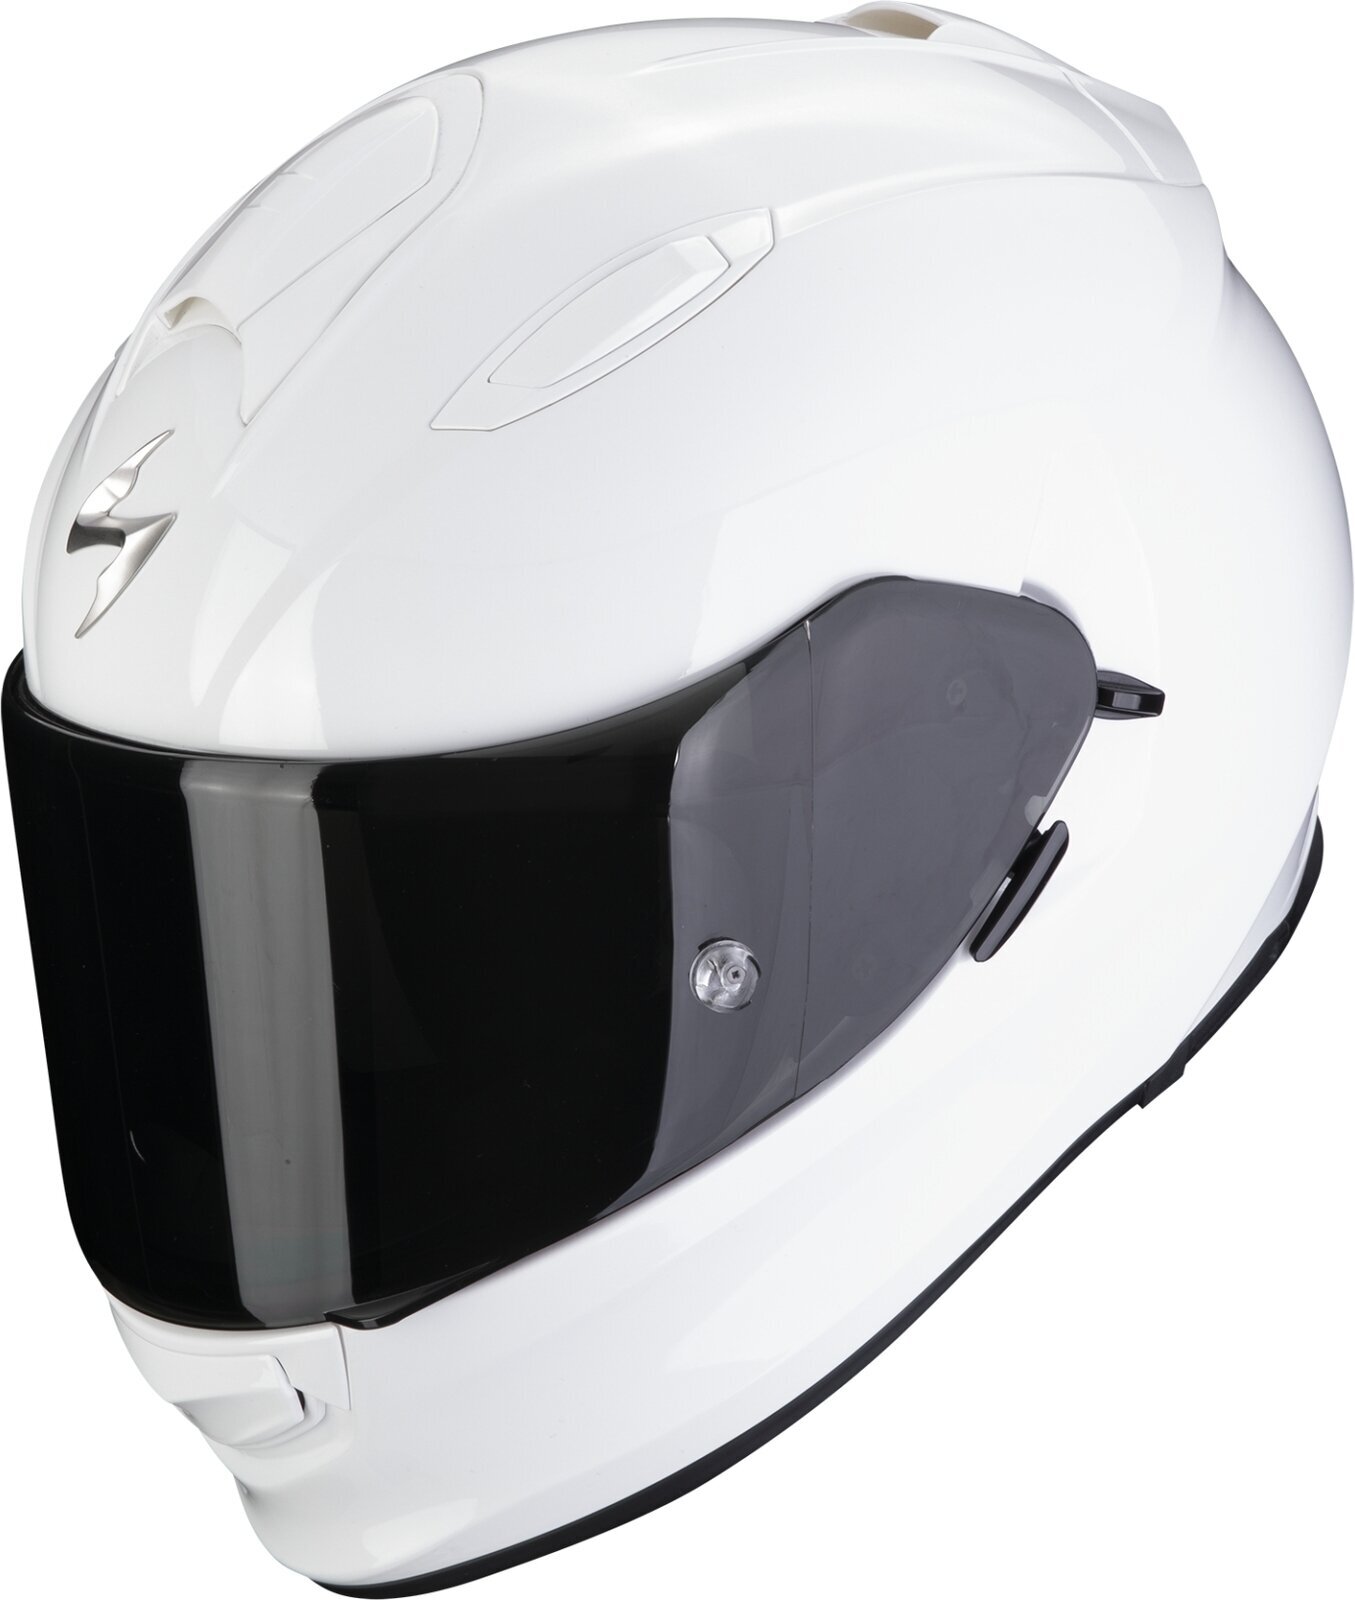 Helm Scorpion EXO 491 SOLID White 2XL Helm